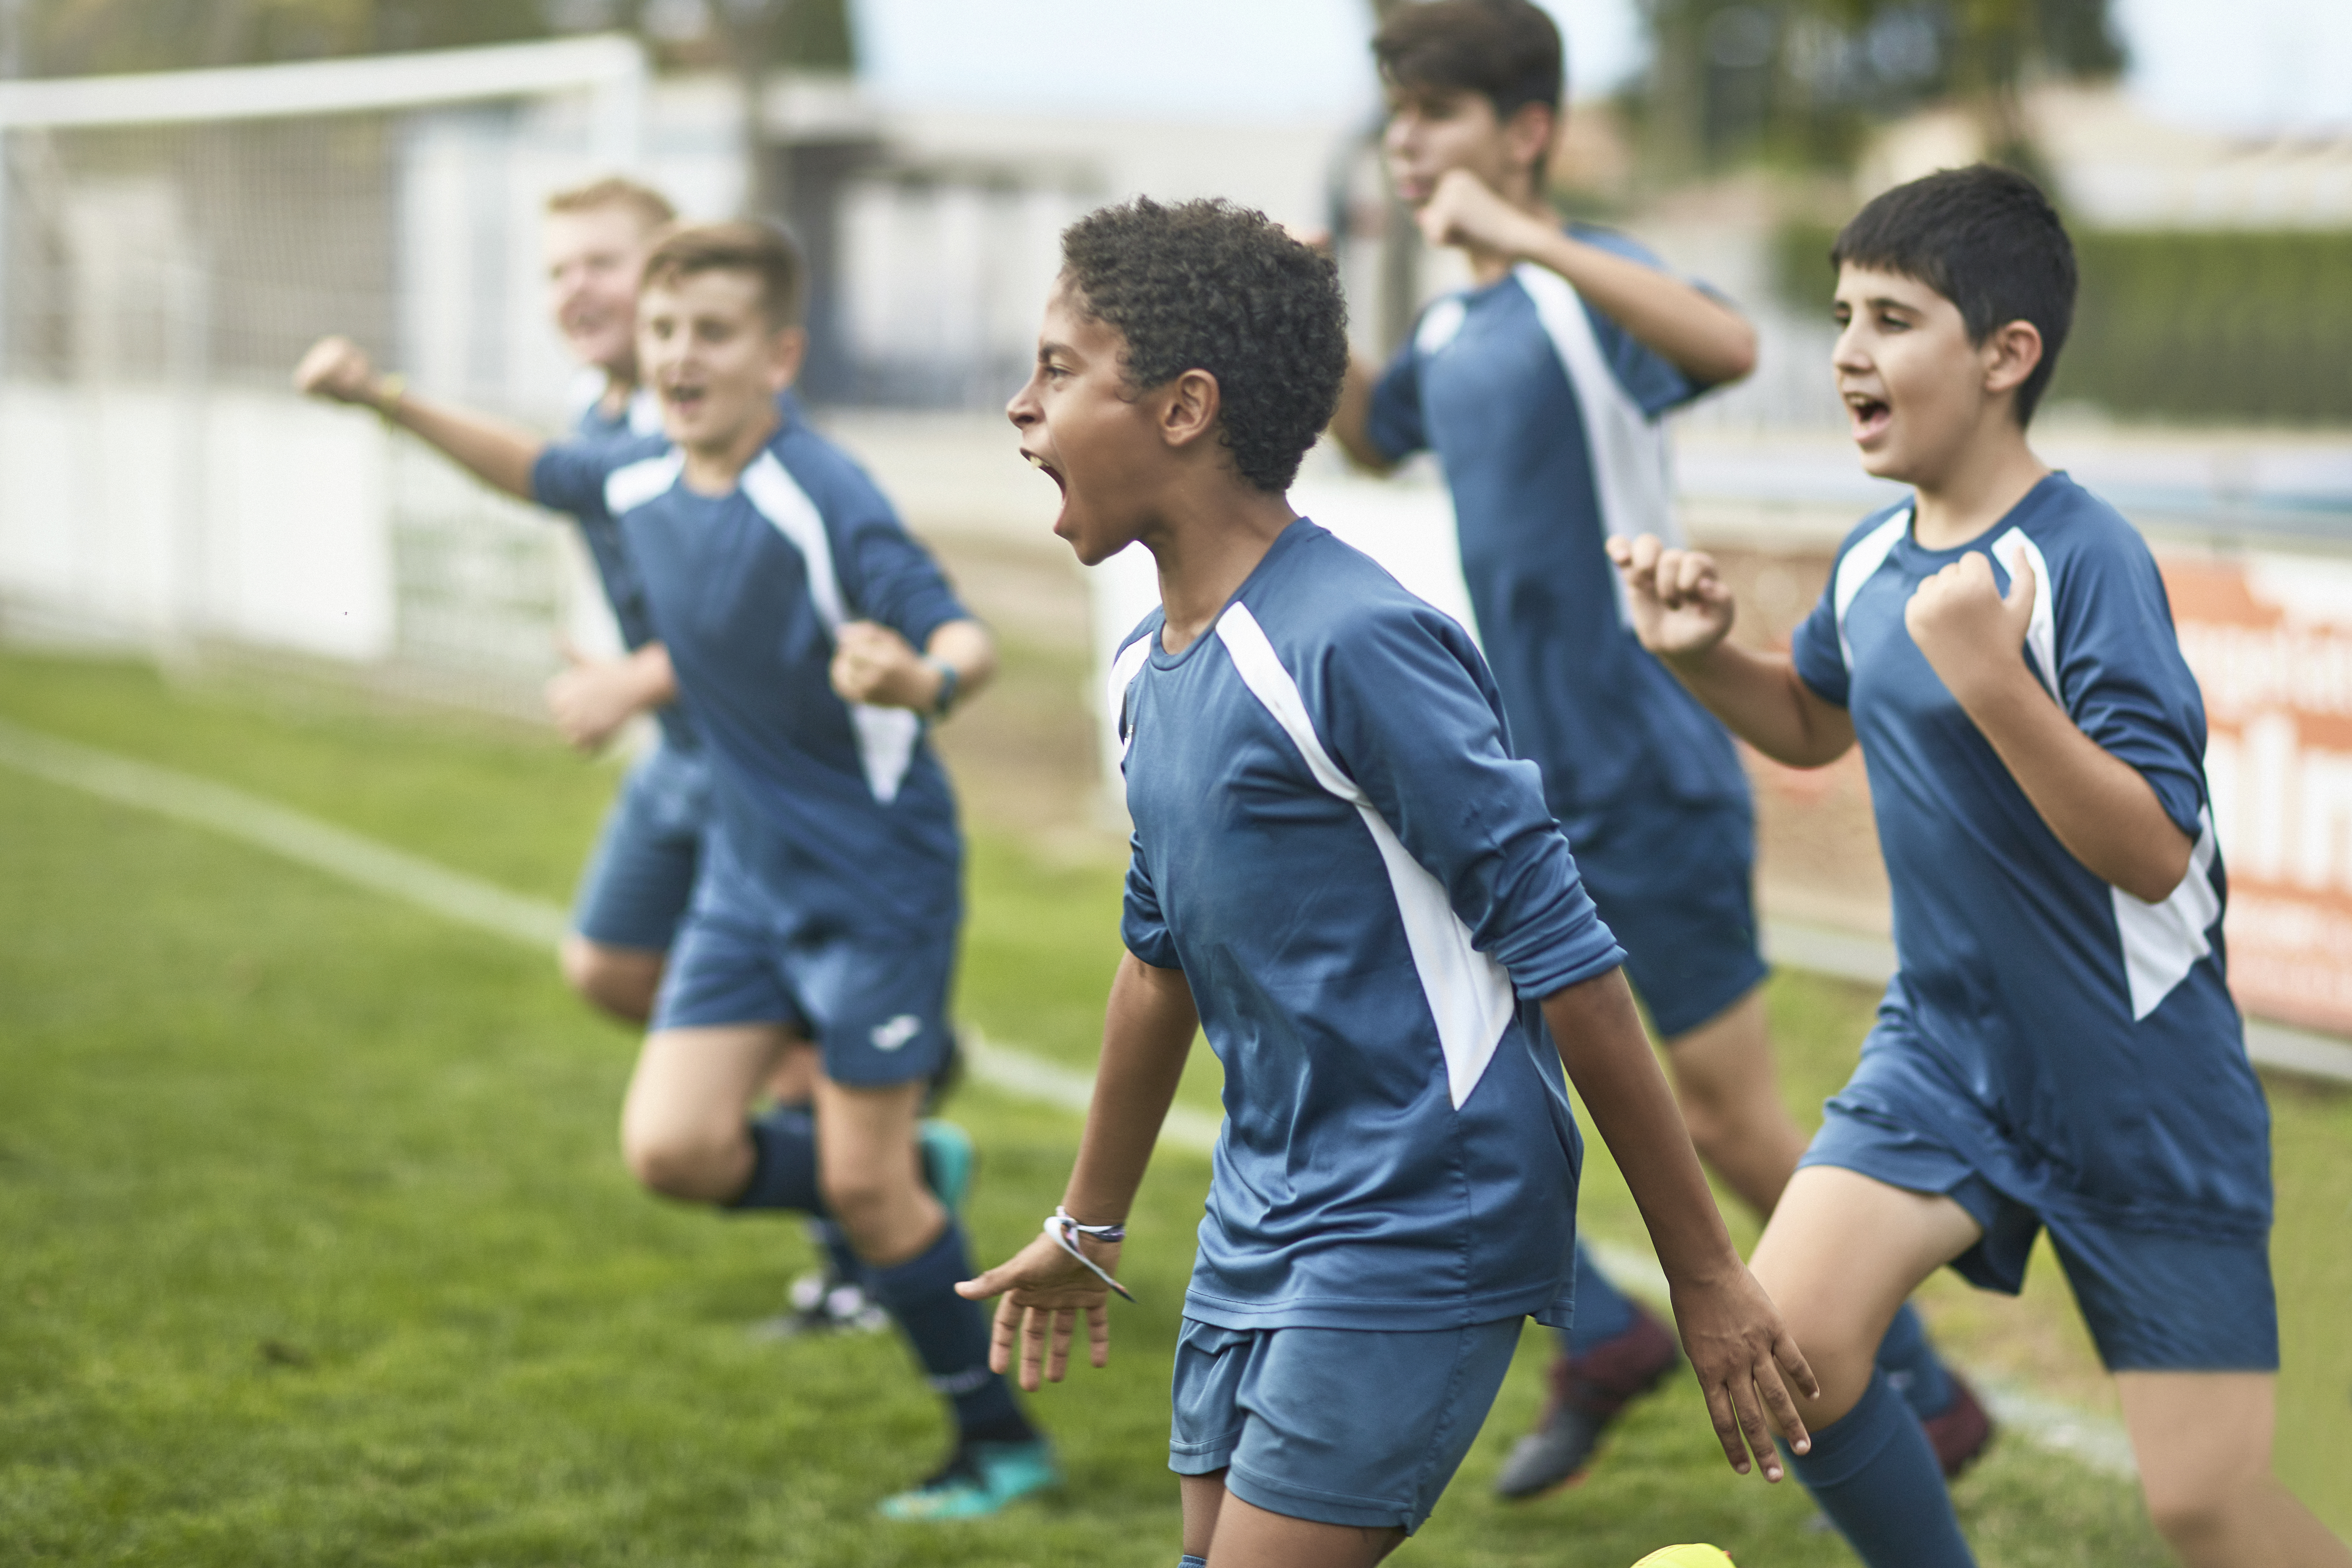 Energetic preteen and teenage male footballers cheering and punching the air as they run onto field for training session. Sports. Outside. 